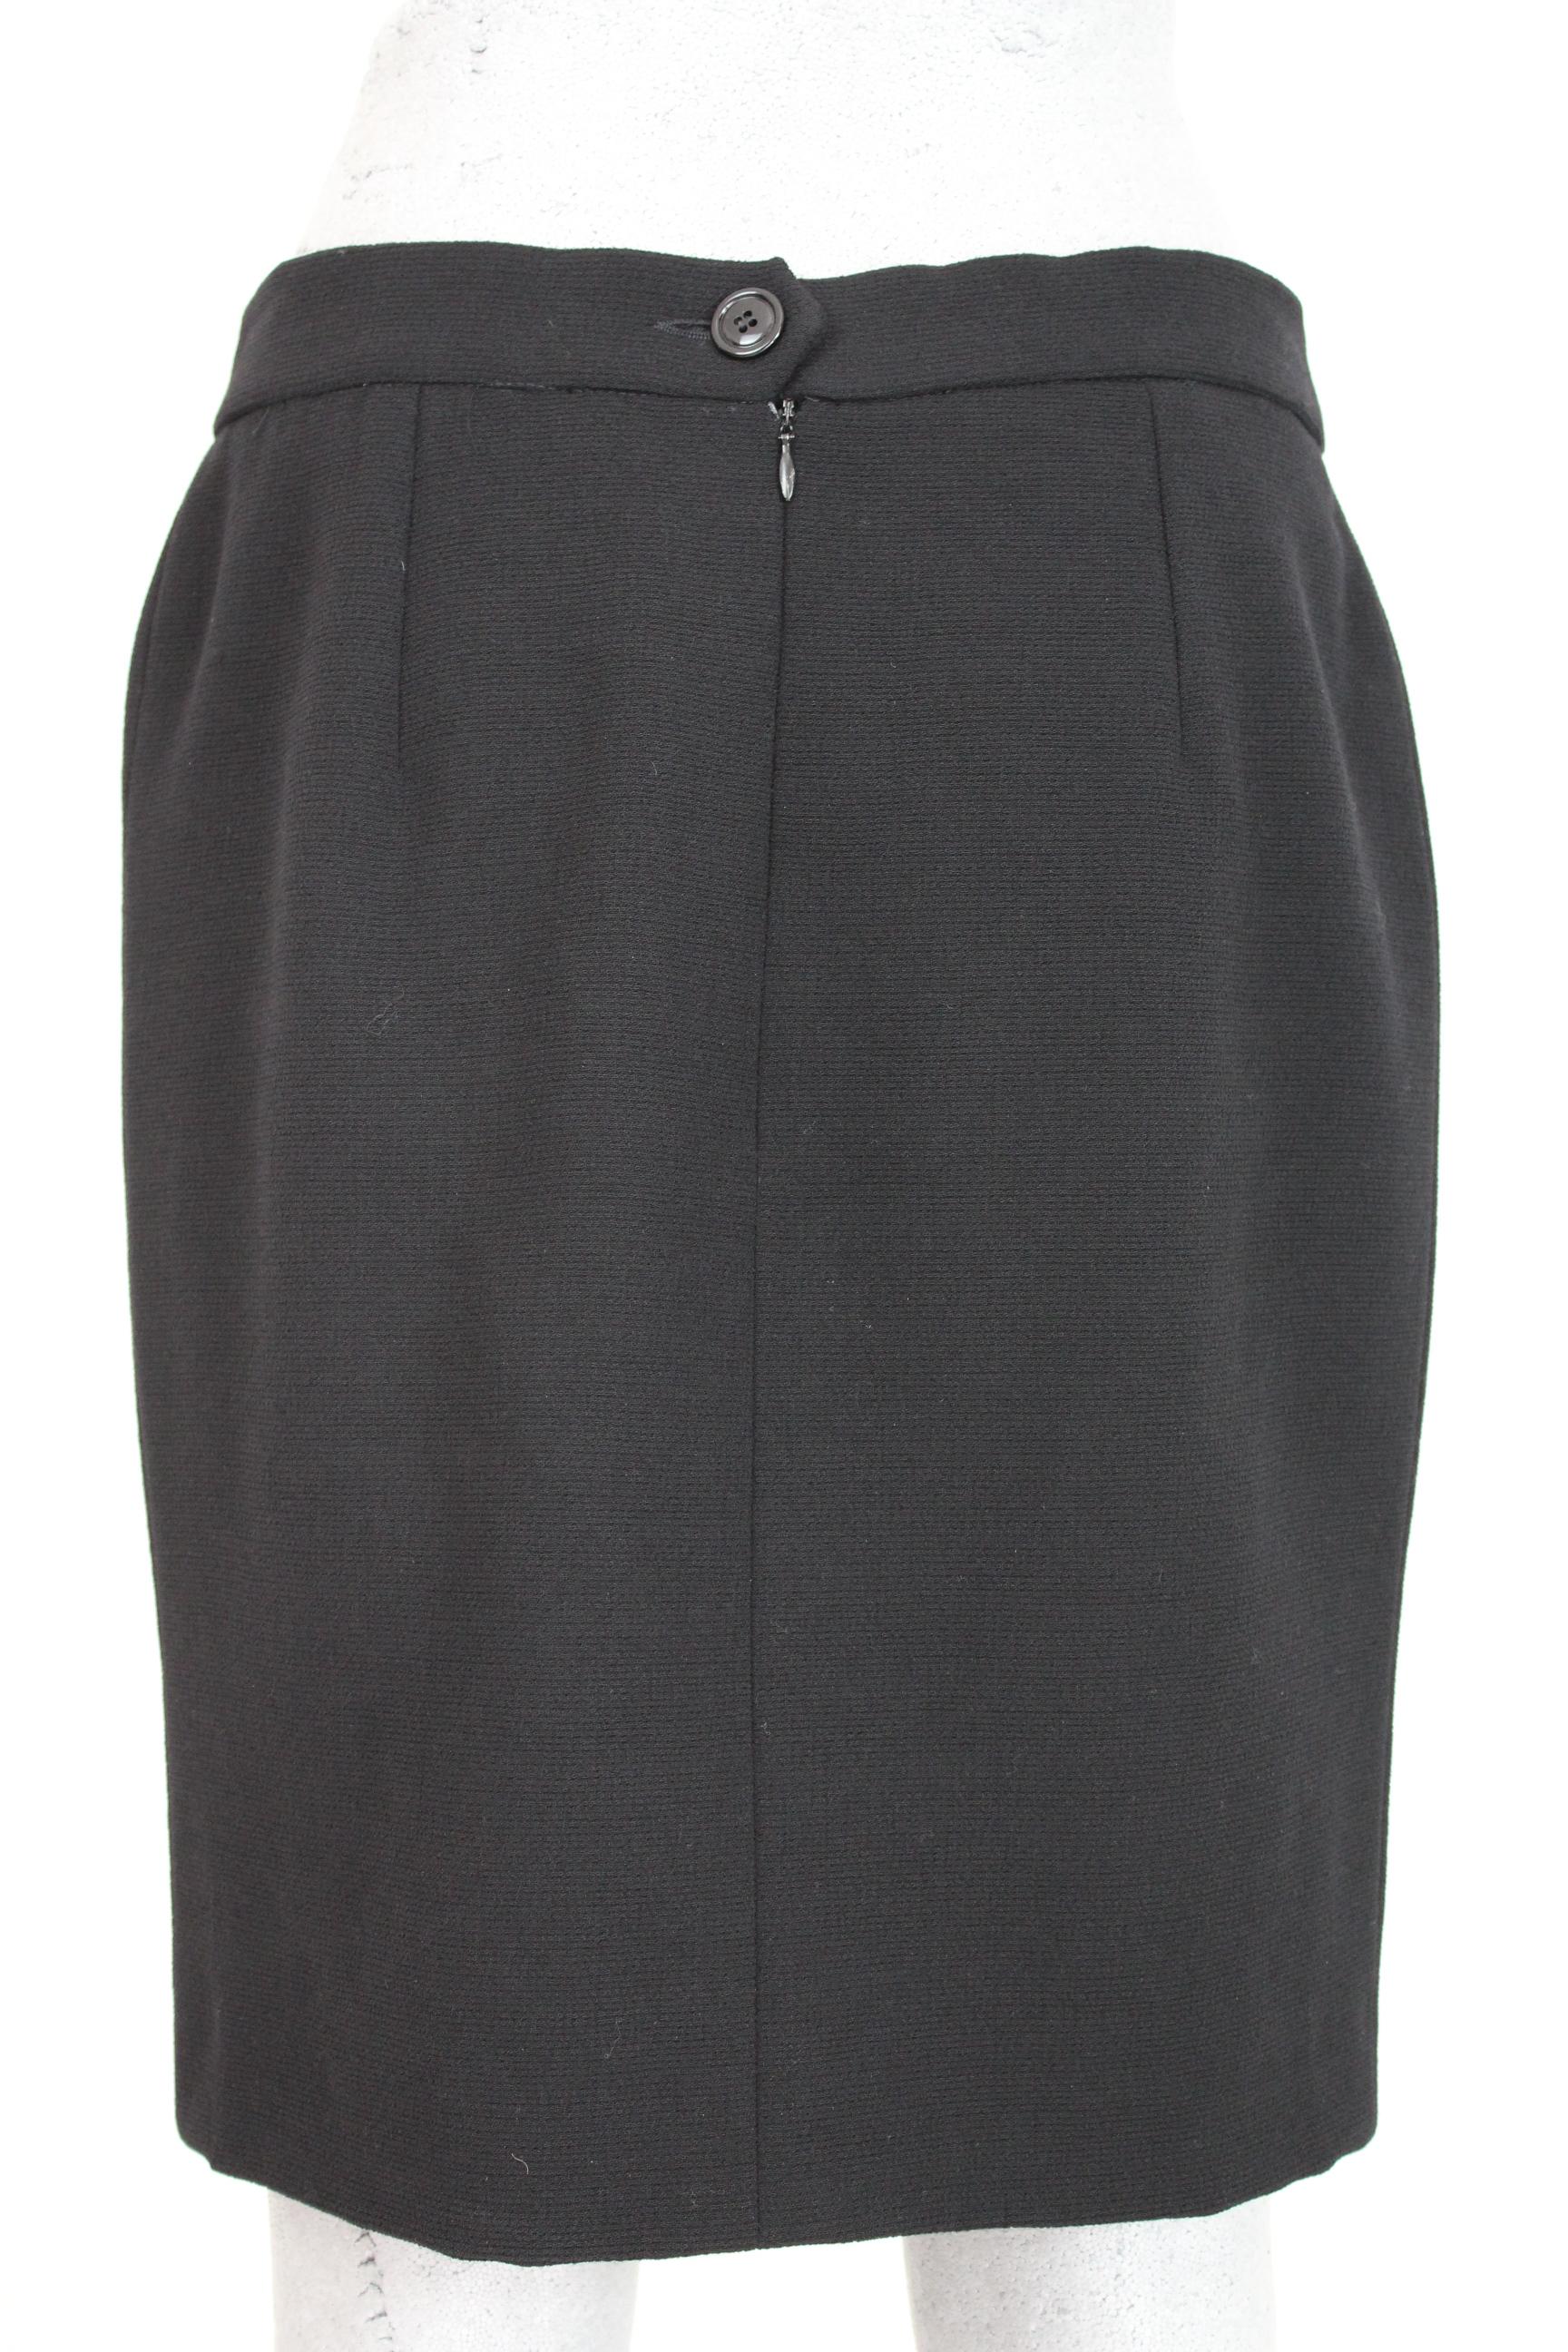 Christian Dior Boutique vintage 80s skirt. Short skirt on the knee, elegant sheath model, black color, in wool. Zip and button closure. Numbered skirt: 37041. Made in France. Excellent vintage conditions.

Size: 44 It 10 Us 12 Uk

Skirt waist: 37